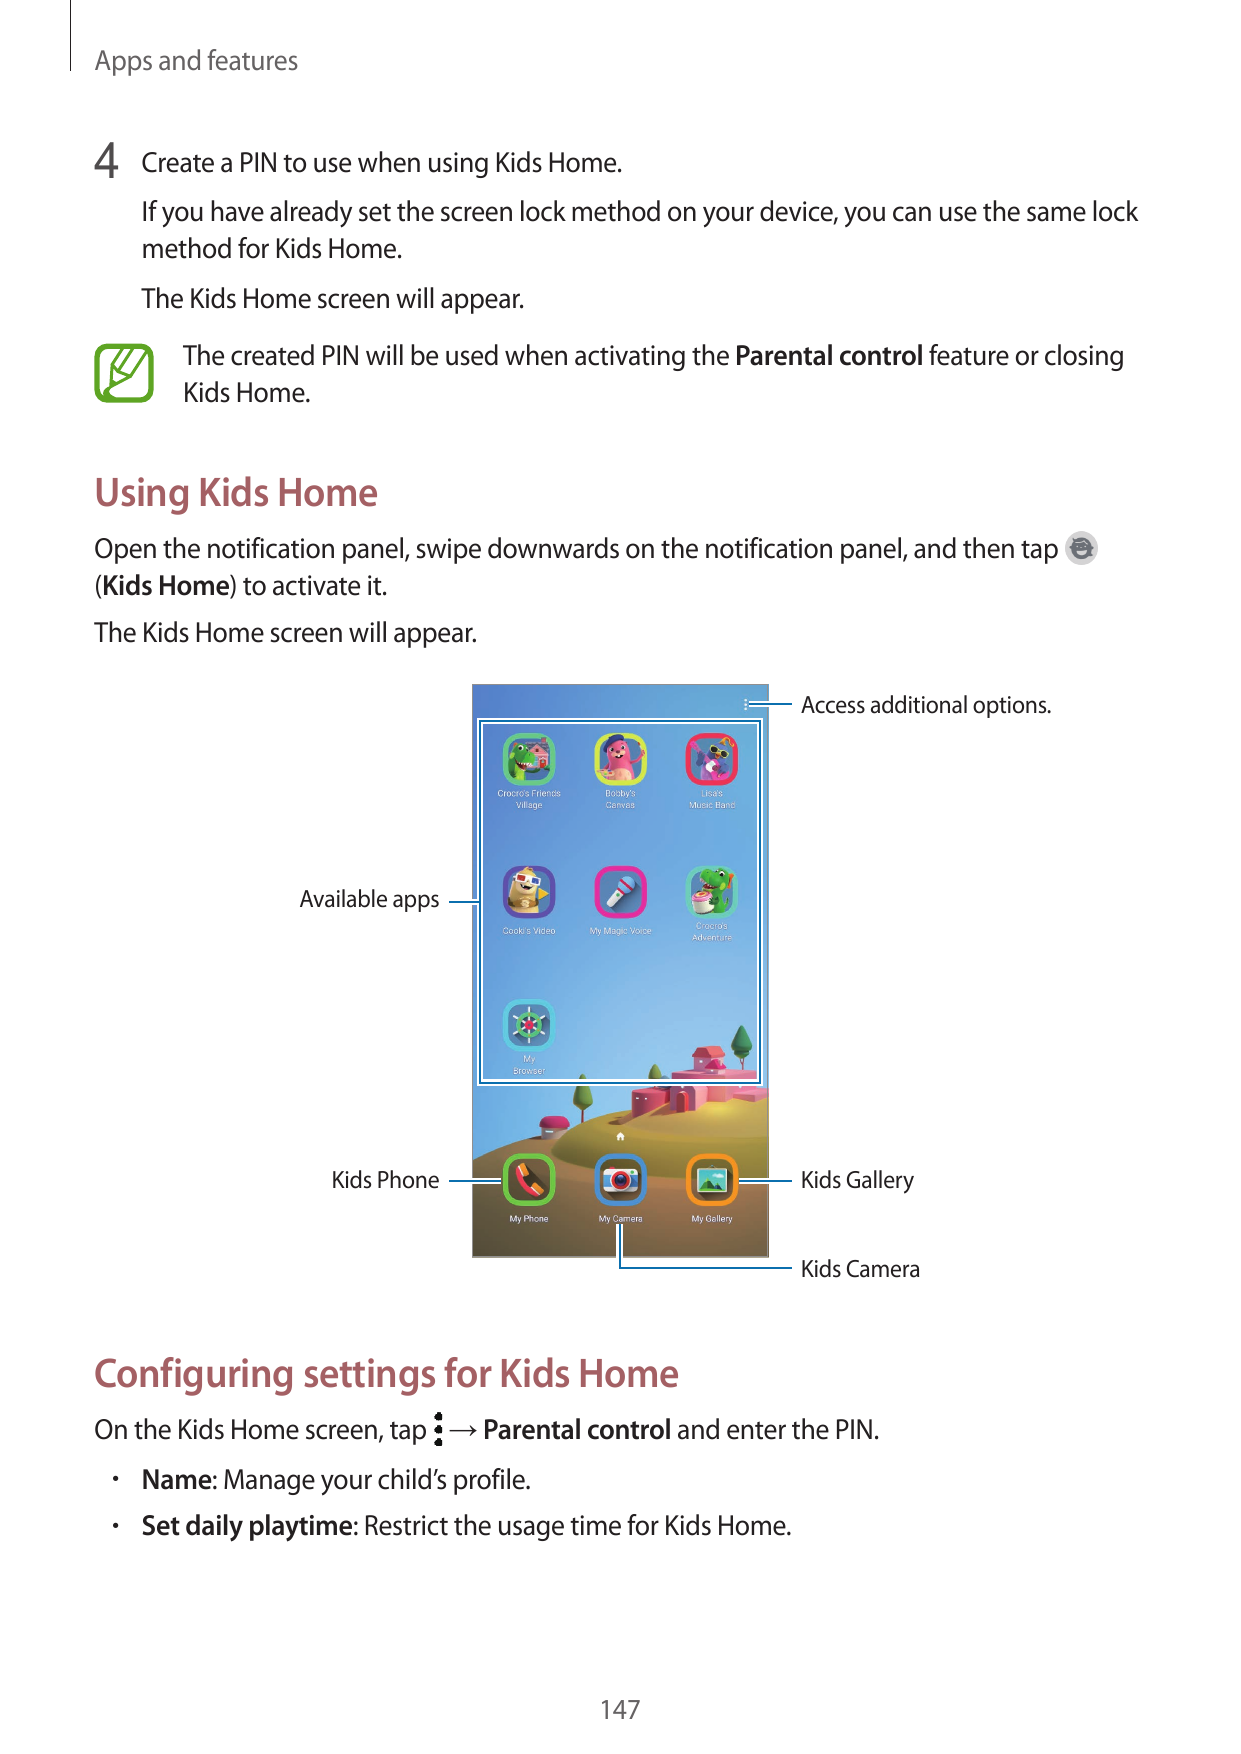 Apps and features4 Create a PIN to use when using Kids Home.If you have already set the screen lock method on your device, you c